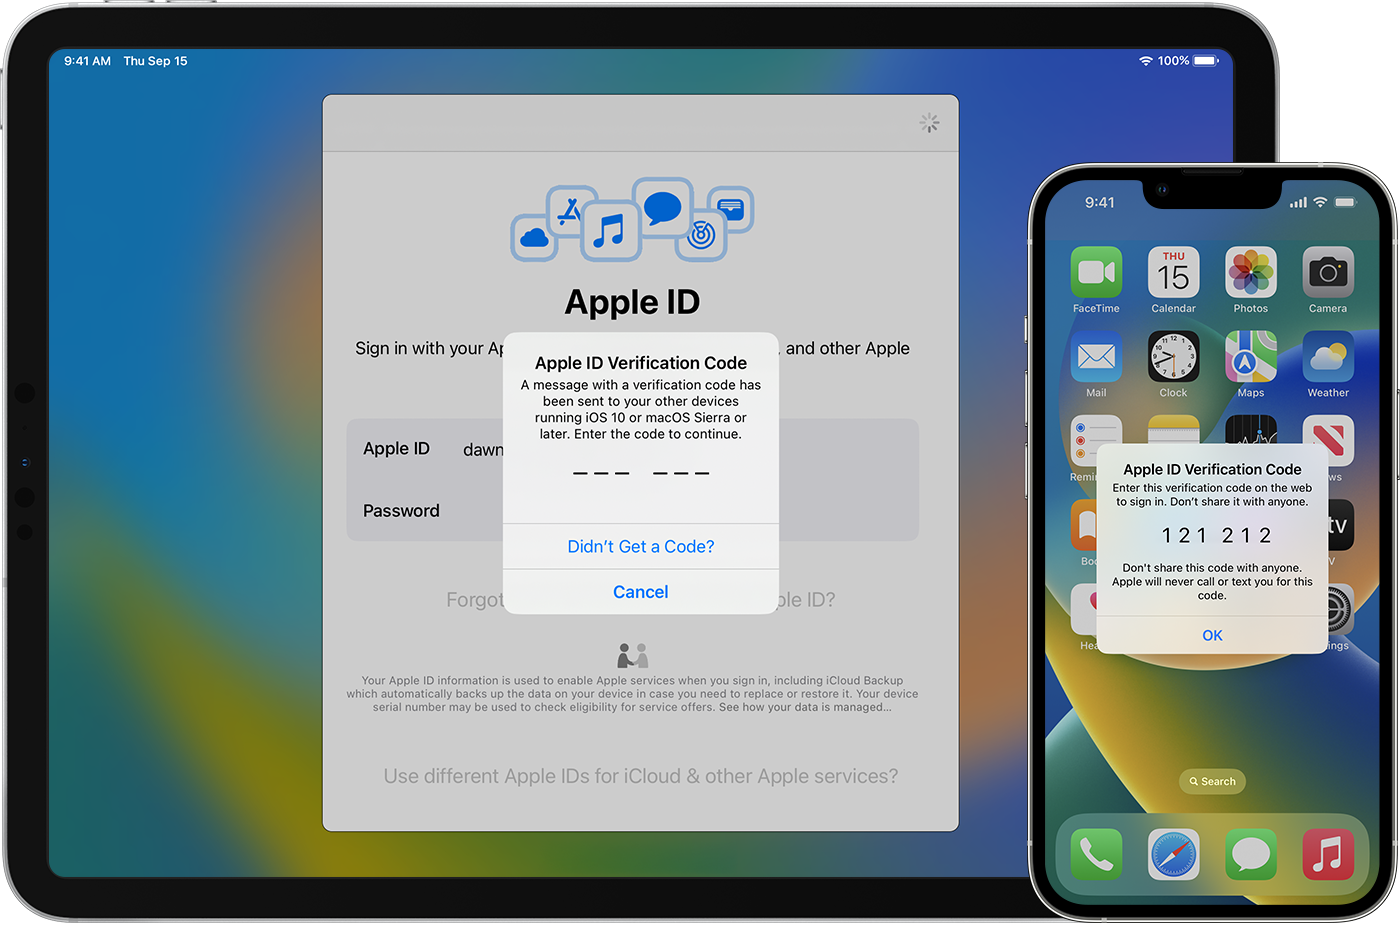 How do I get two-factor authentication without an iPhone?